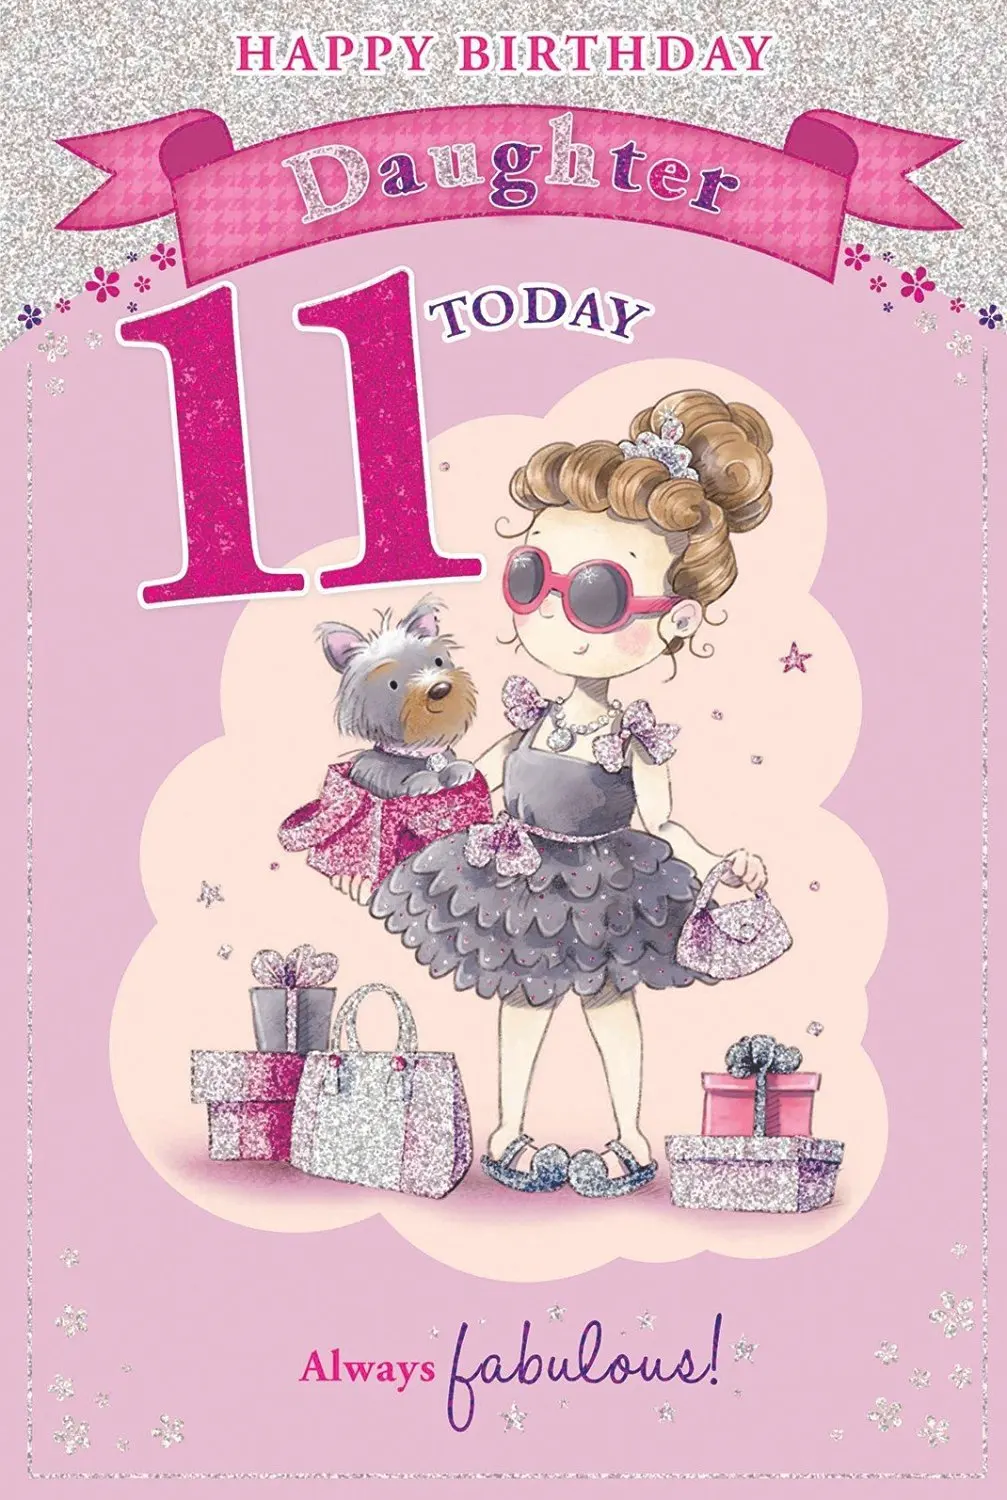 7.97. Candy Club Daughter's 11Th Birthday Card - 11 Today Girl & D...